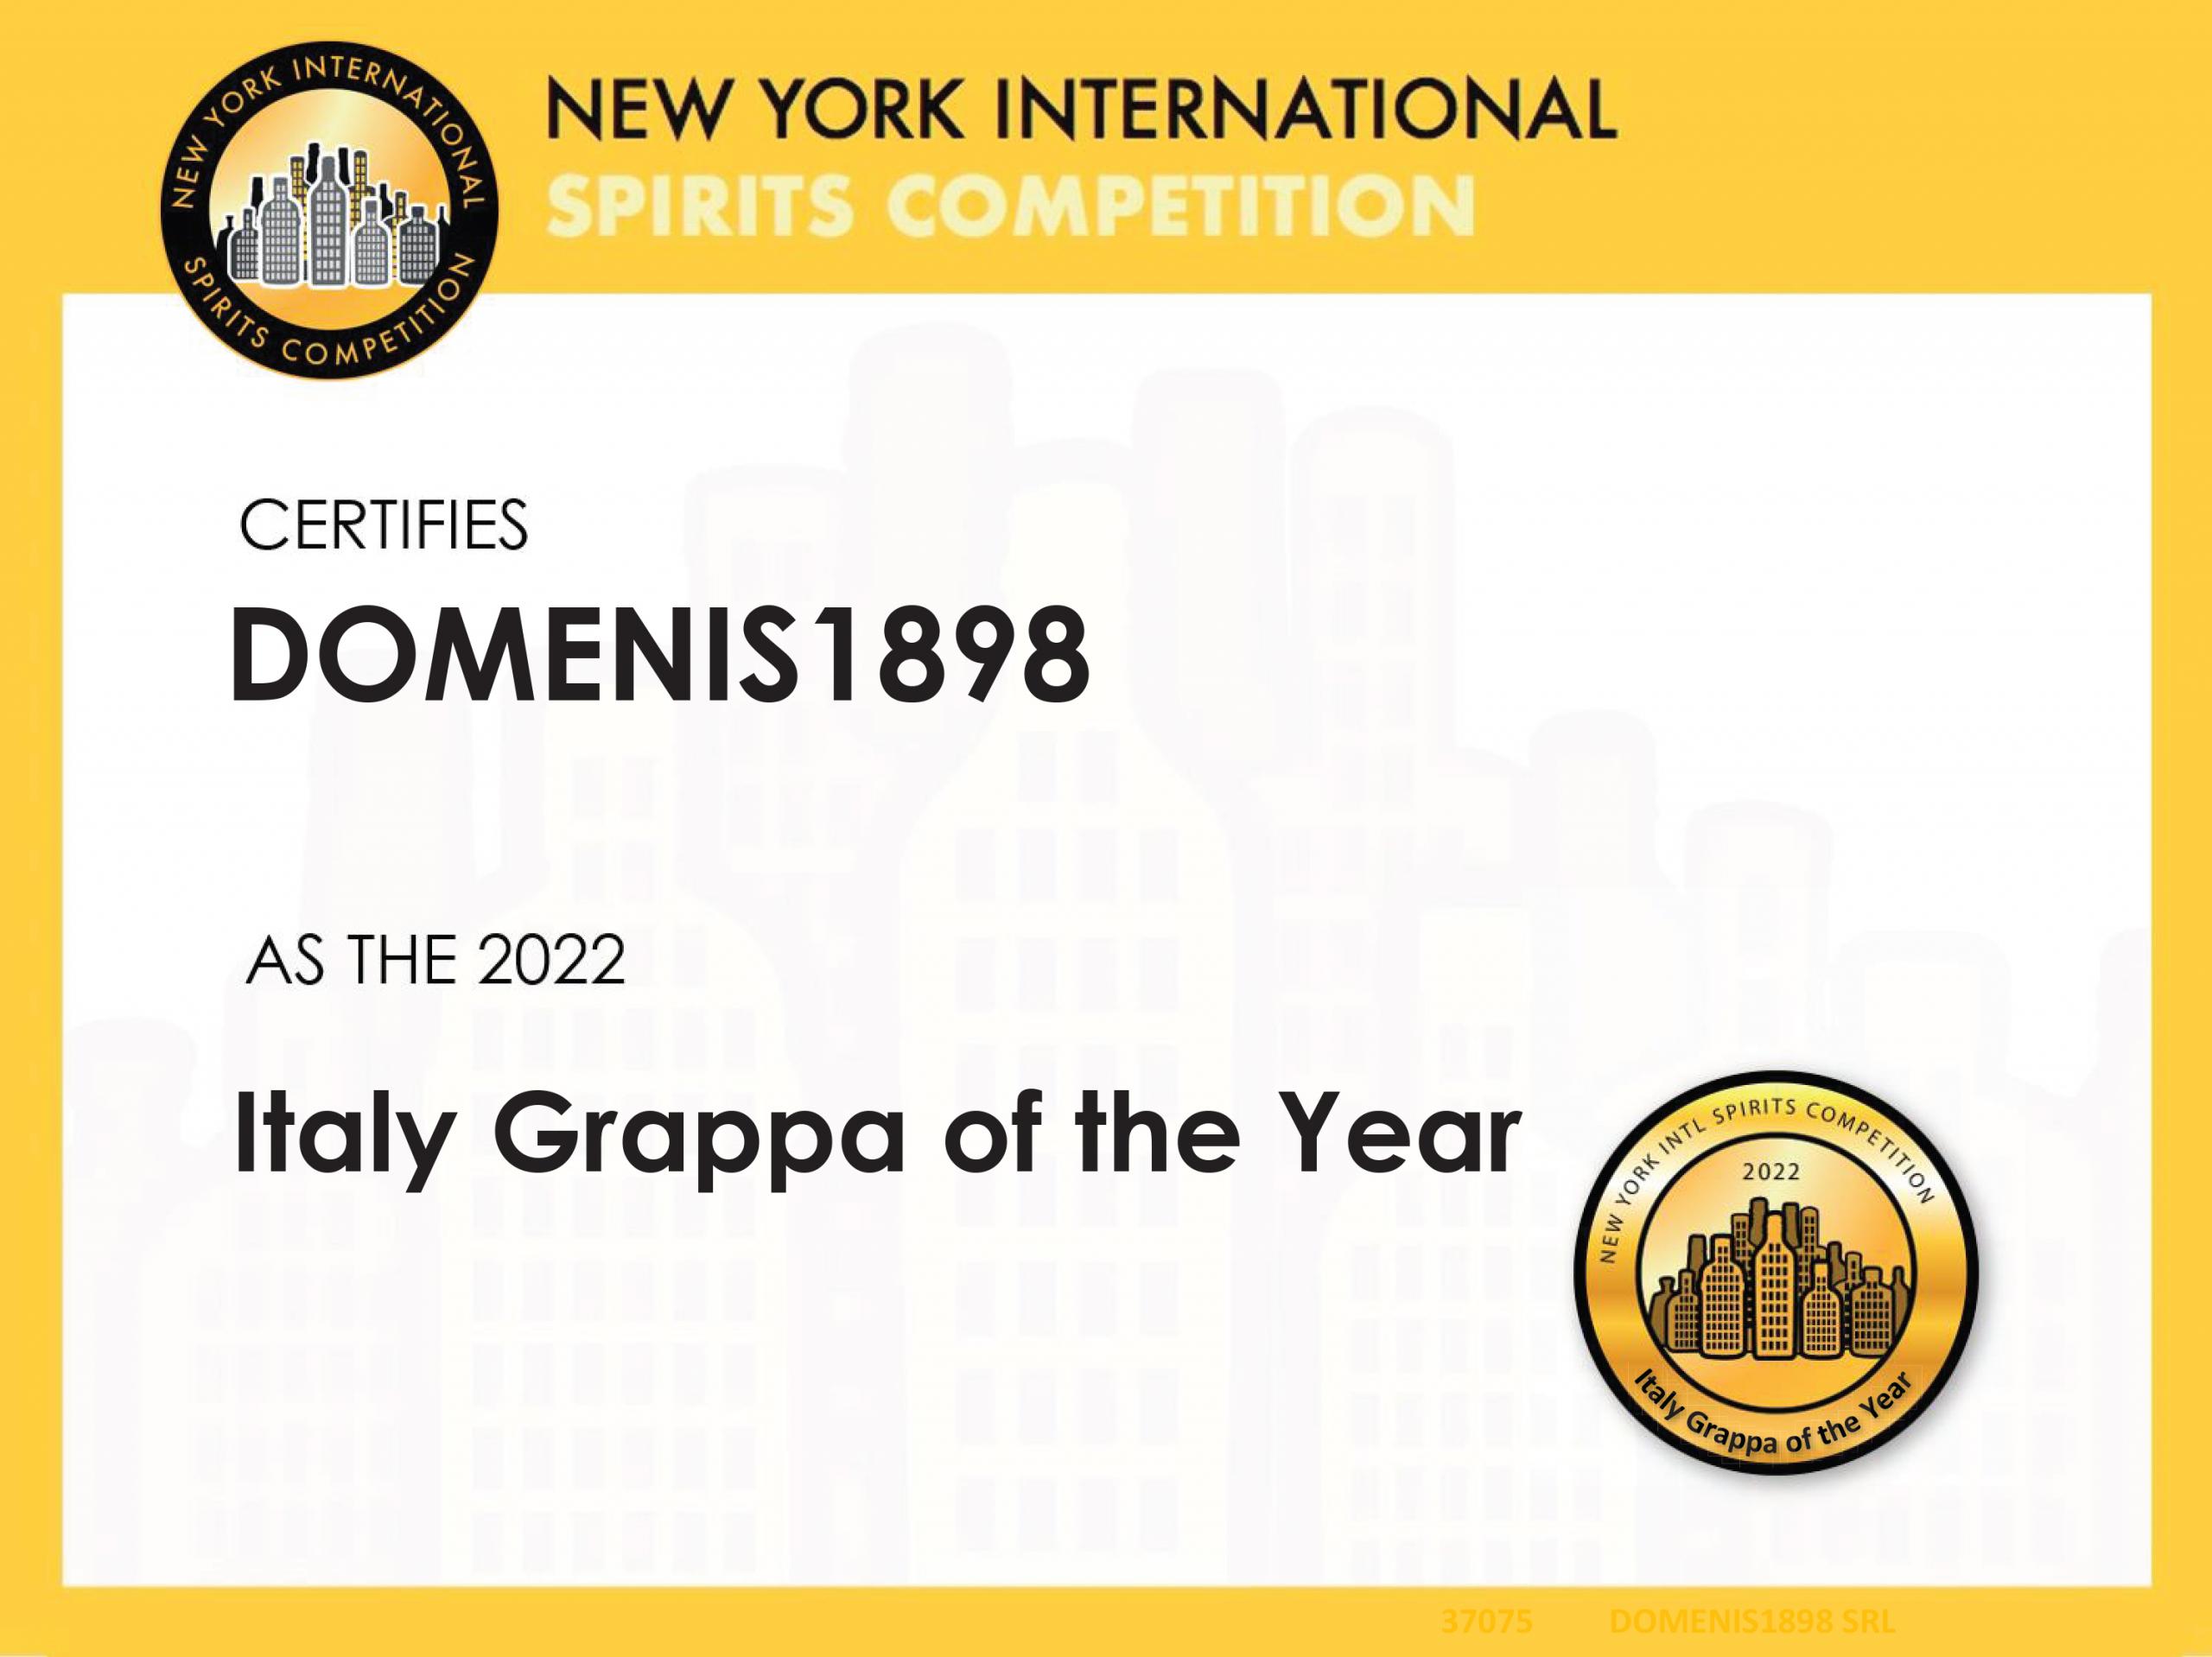 New York Intl Spirits Competition 2022 – Italy Grappa of the Year